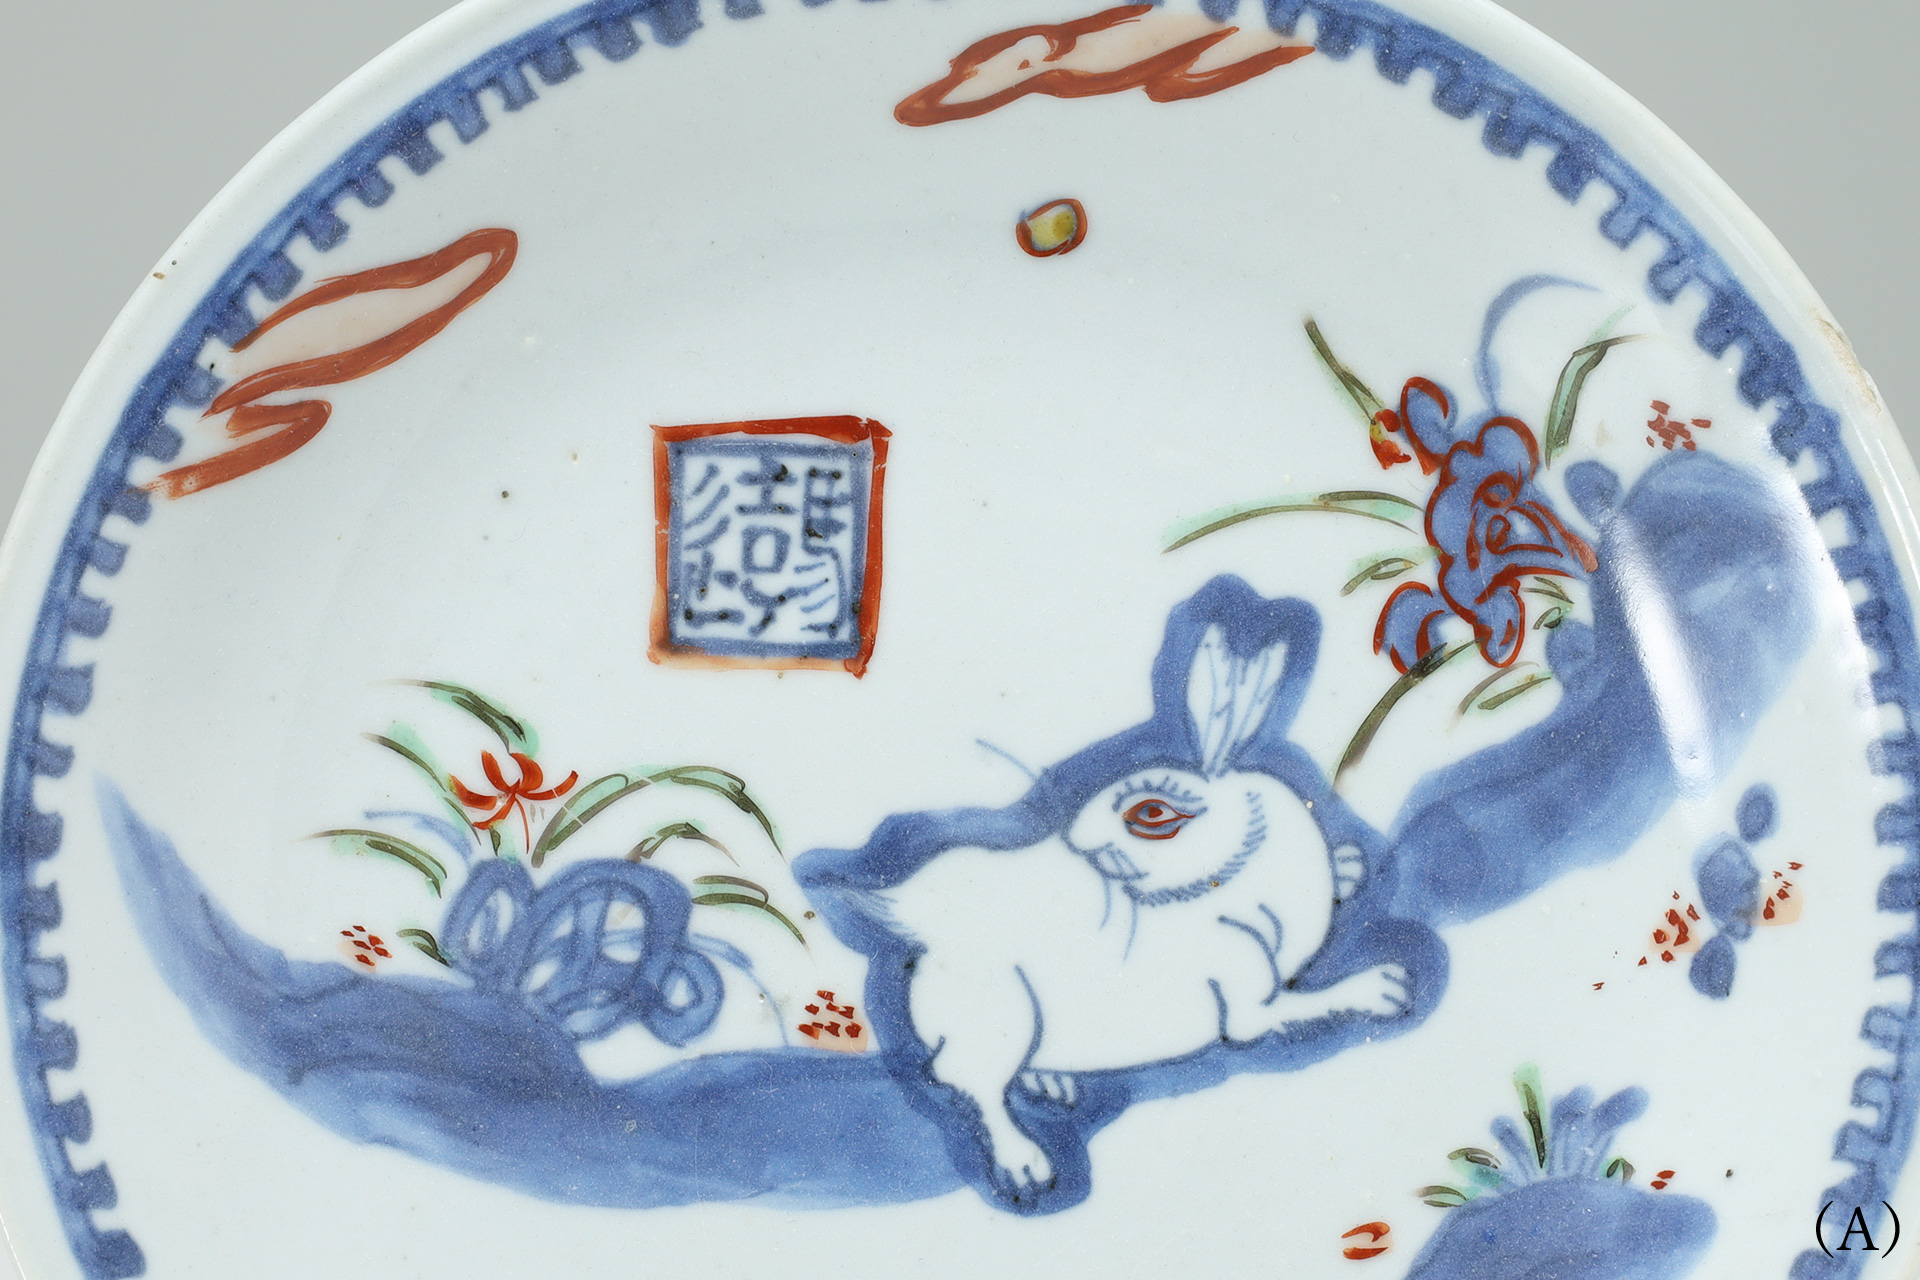 Tenkei-Akae Small Dish with Design of Rabbit（5 Pieces / Ming Dynasty）-3a